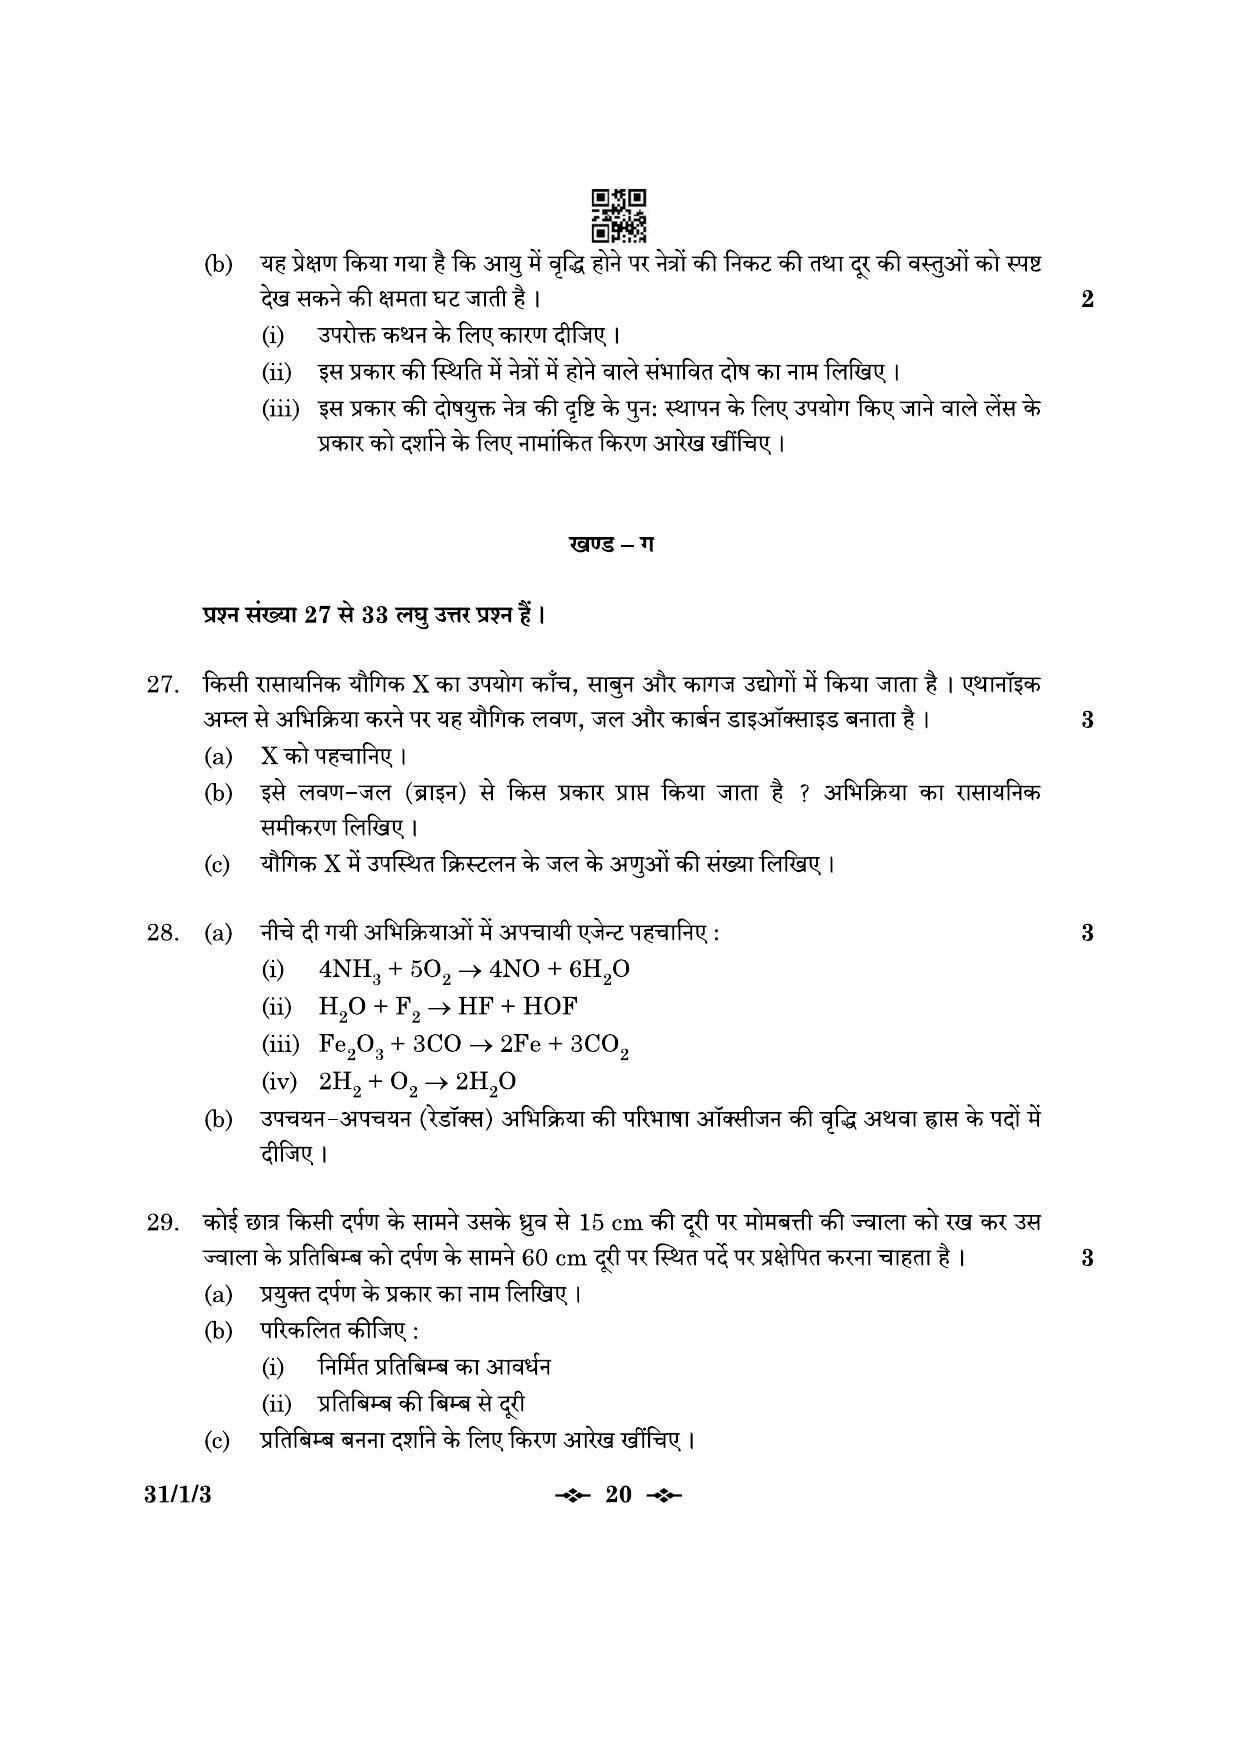 CBSE Class 10 31-1-3 Science 2023 Question Paper - Page 20